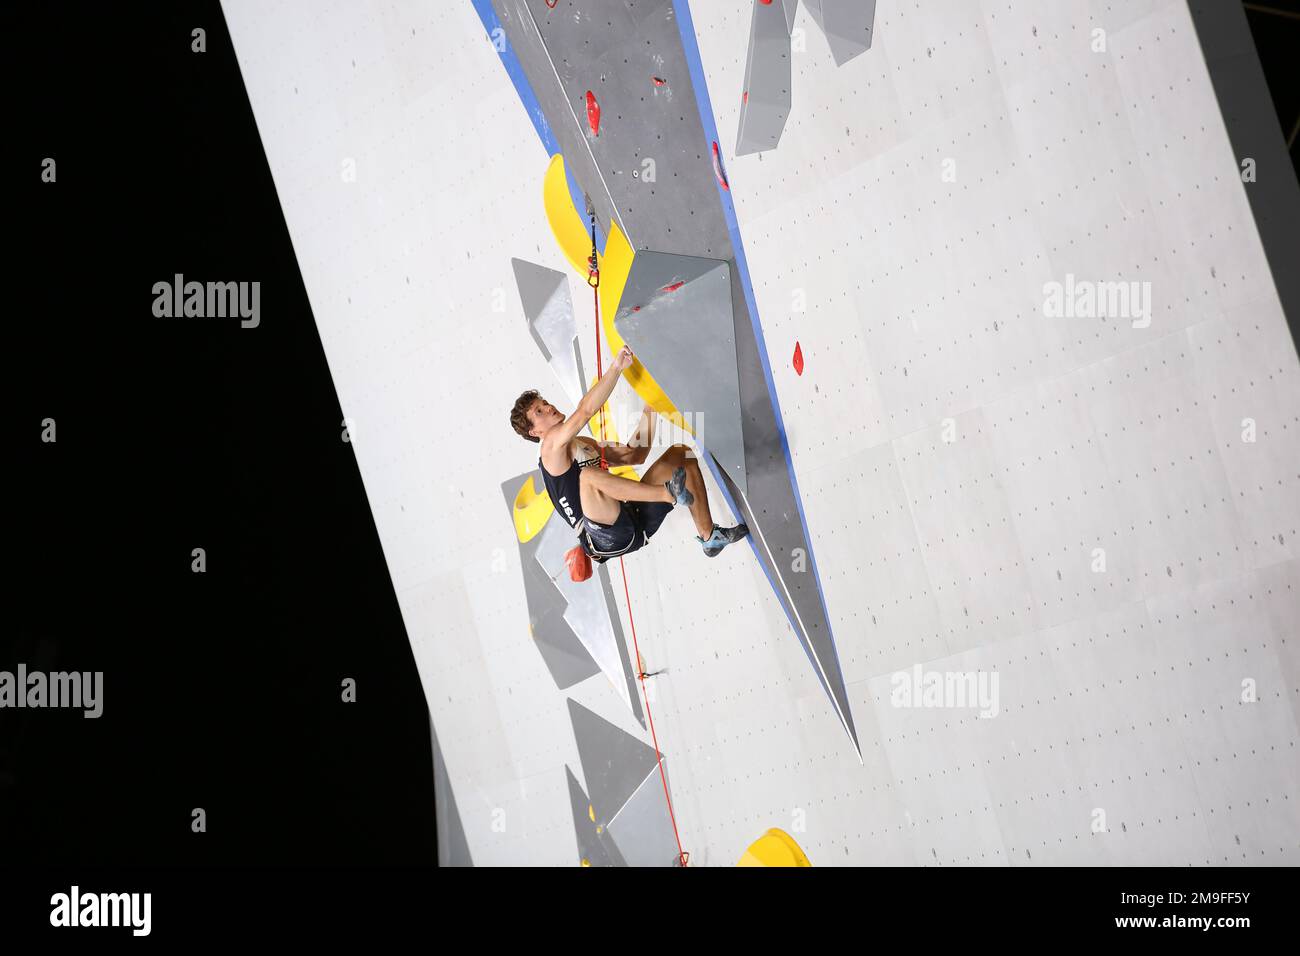 AUG 5, 2021 - TOKYO, JAPAN: Nathaniel COLEMAN of United States competes in the Sport Climbing Men's Combined Lead Final at the Tokyo 2020 Olympic Game Stock Photo